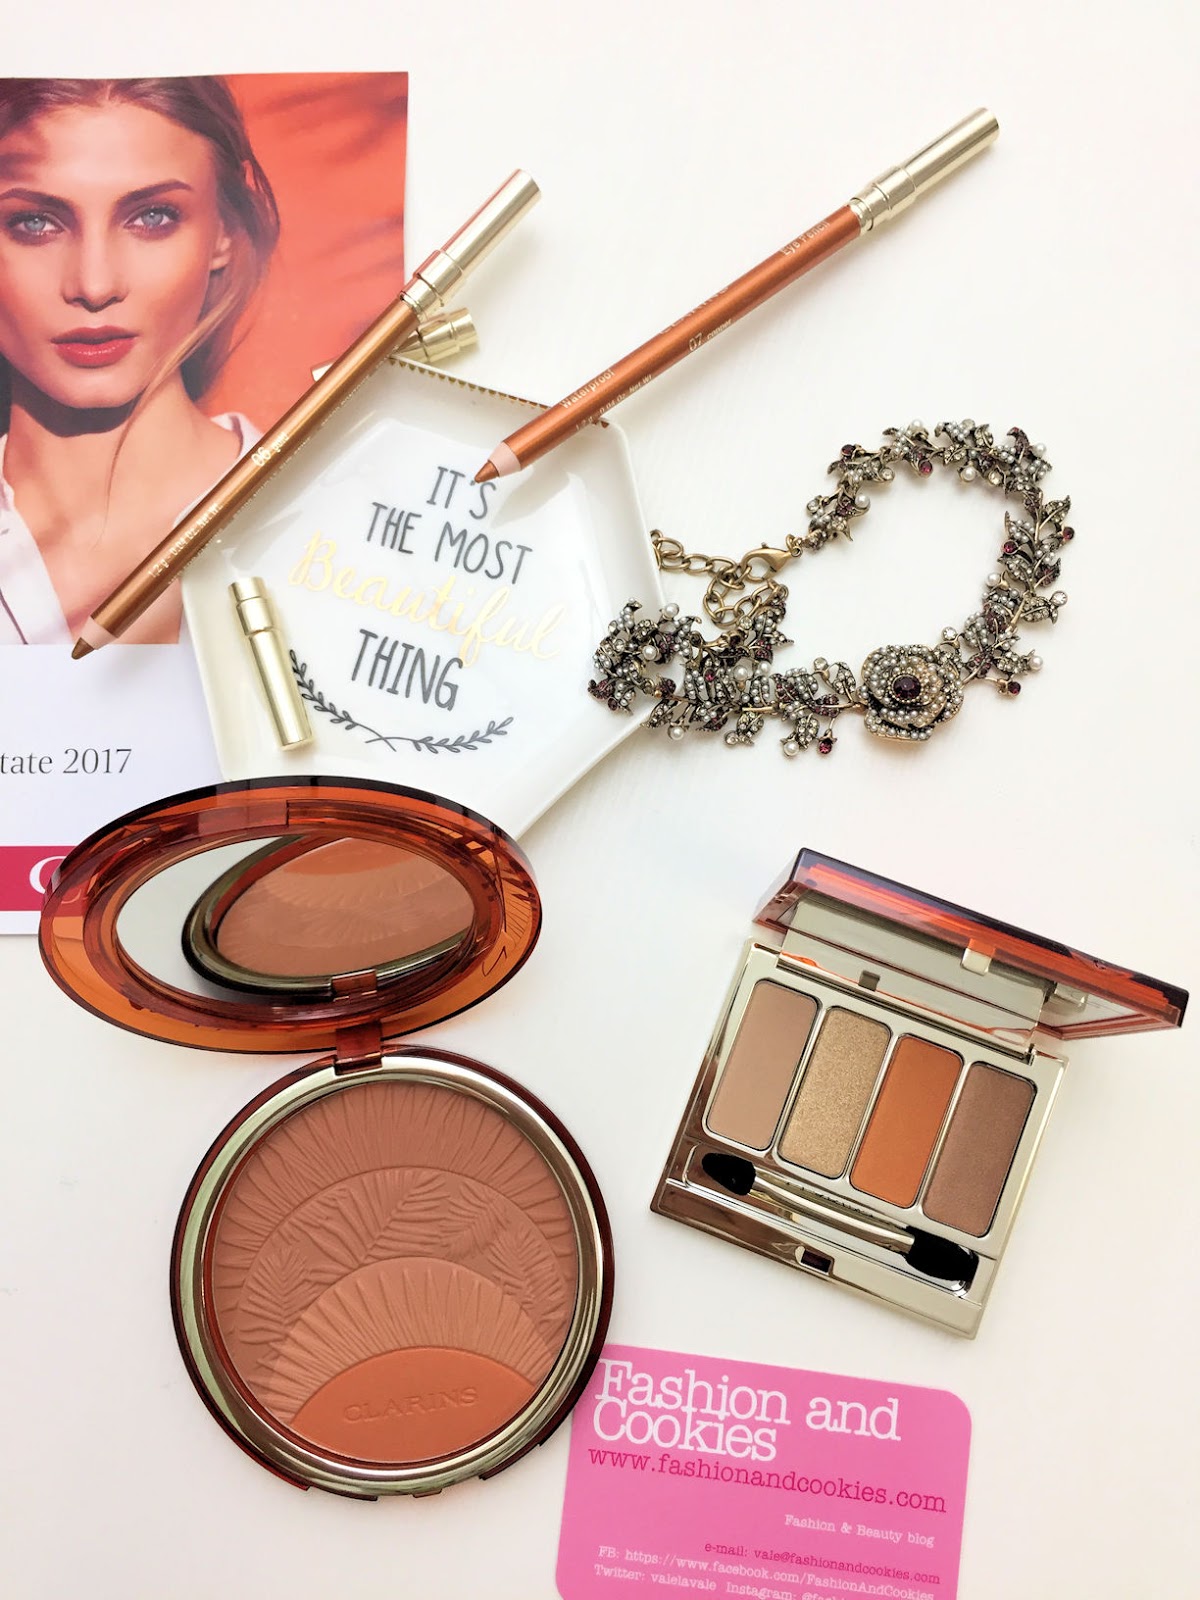 Clarins makeup collezione Sunkissed per l'estate 2017 su Fashion and Cookies beauty blog, beauty blogger